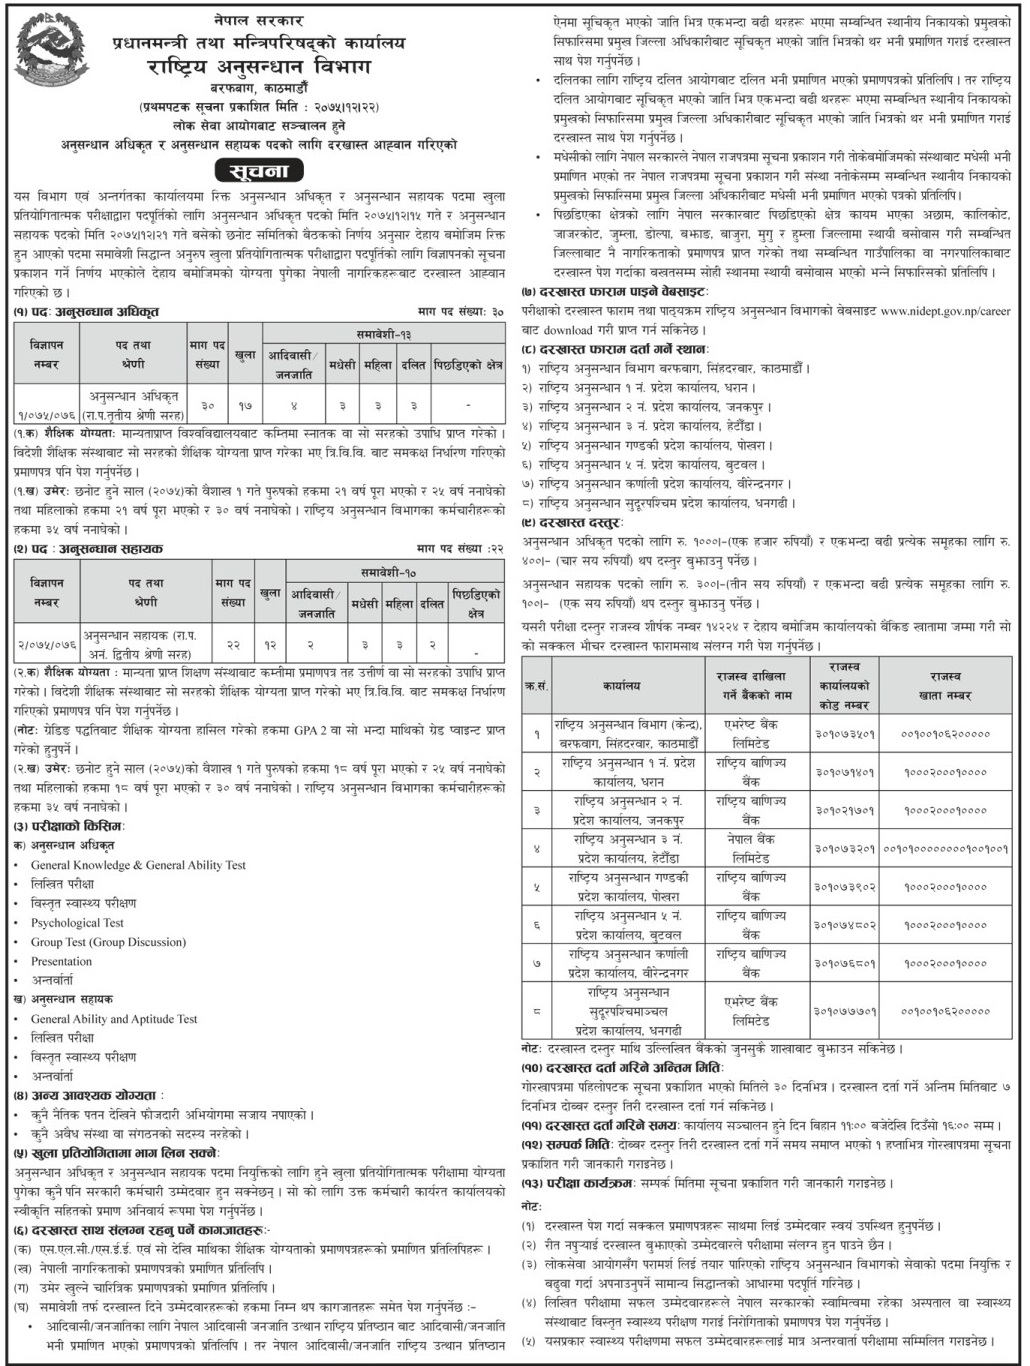 National Investigation Department of Nepal Vacancy